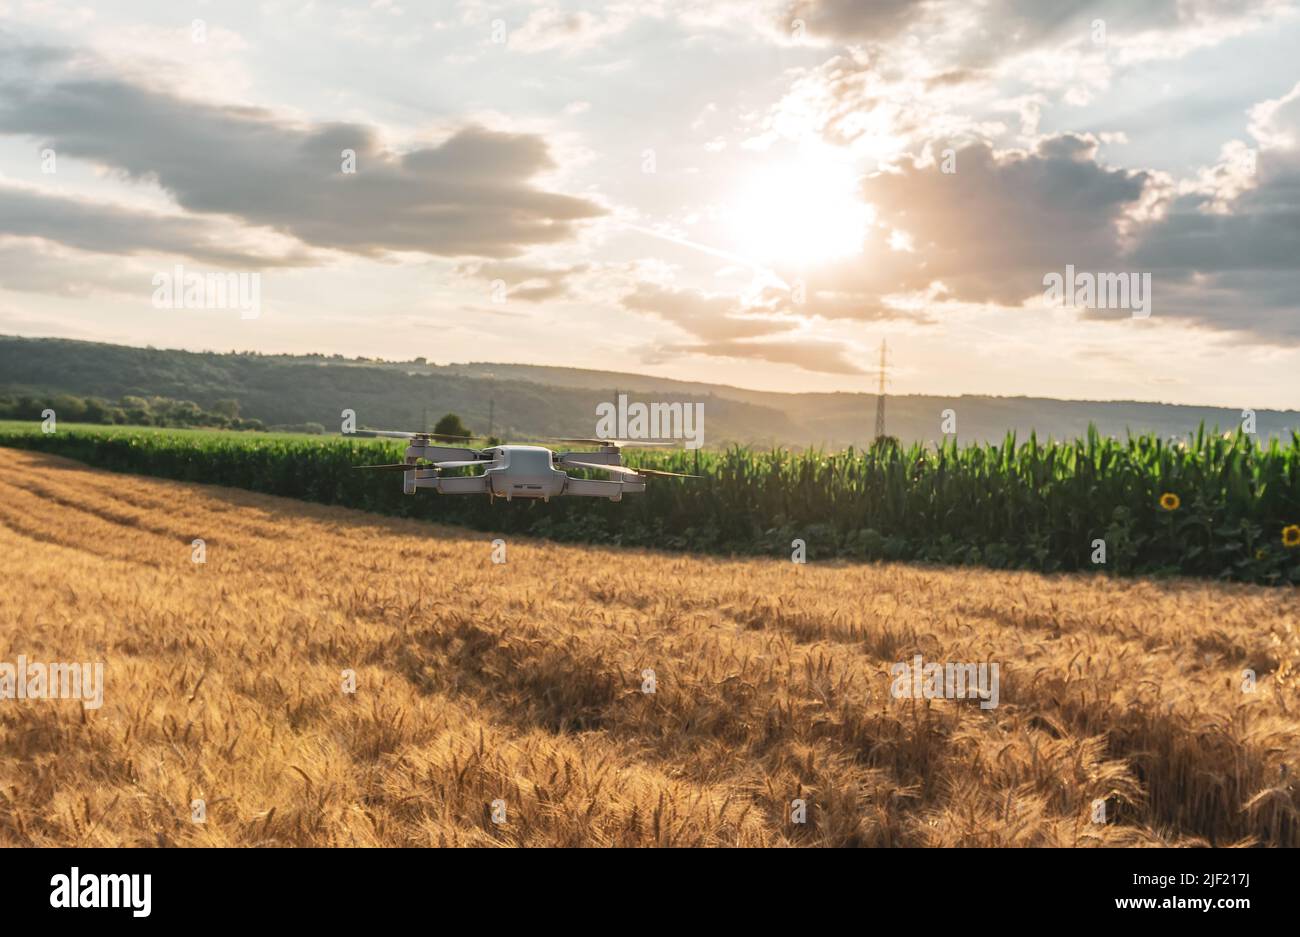 Wheat field and corn crop land, concept of using drones in agriculture Stock Photo